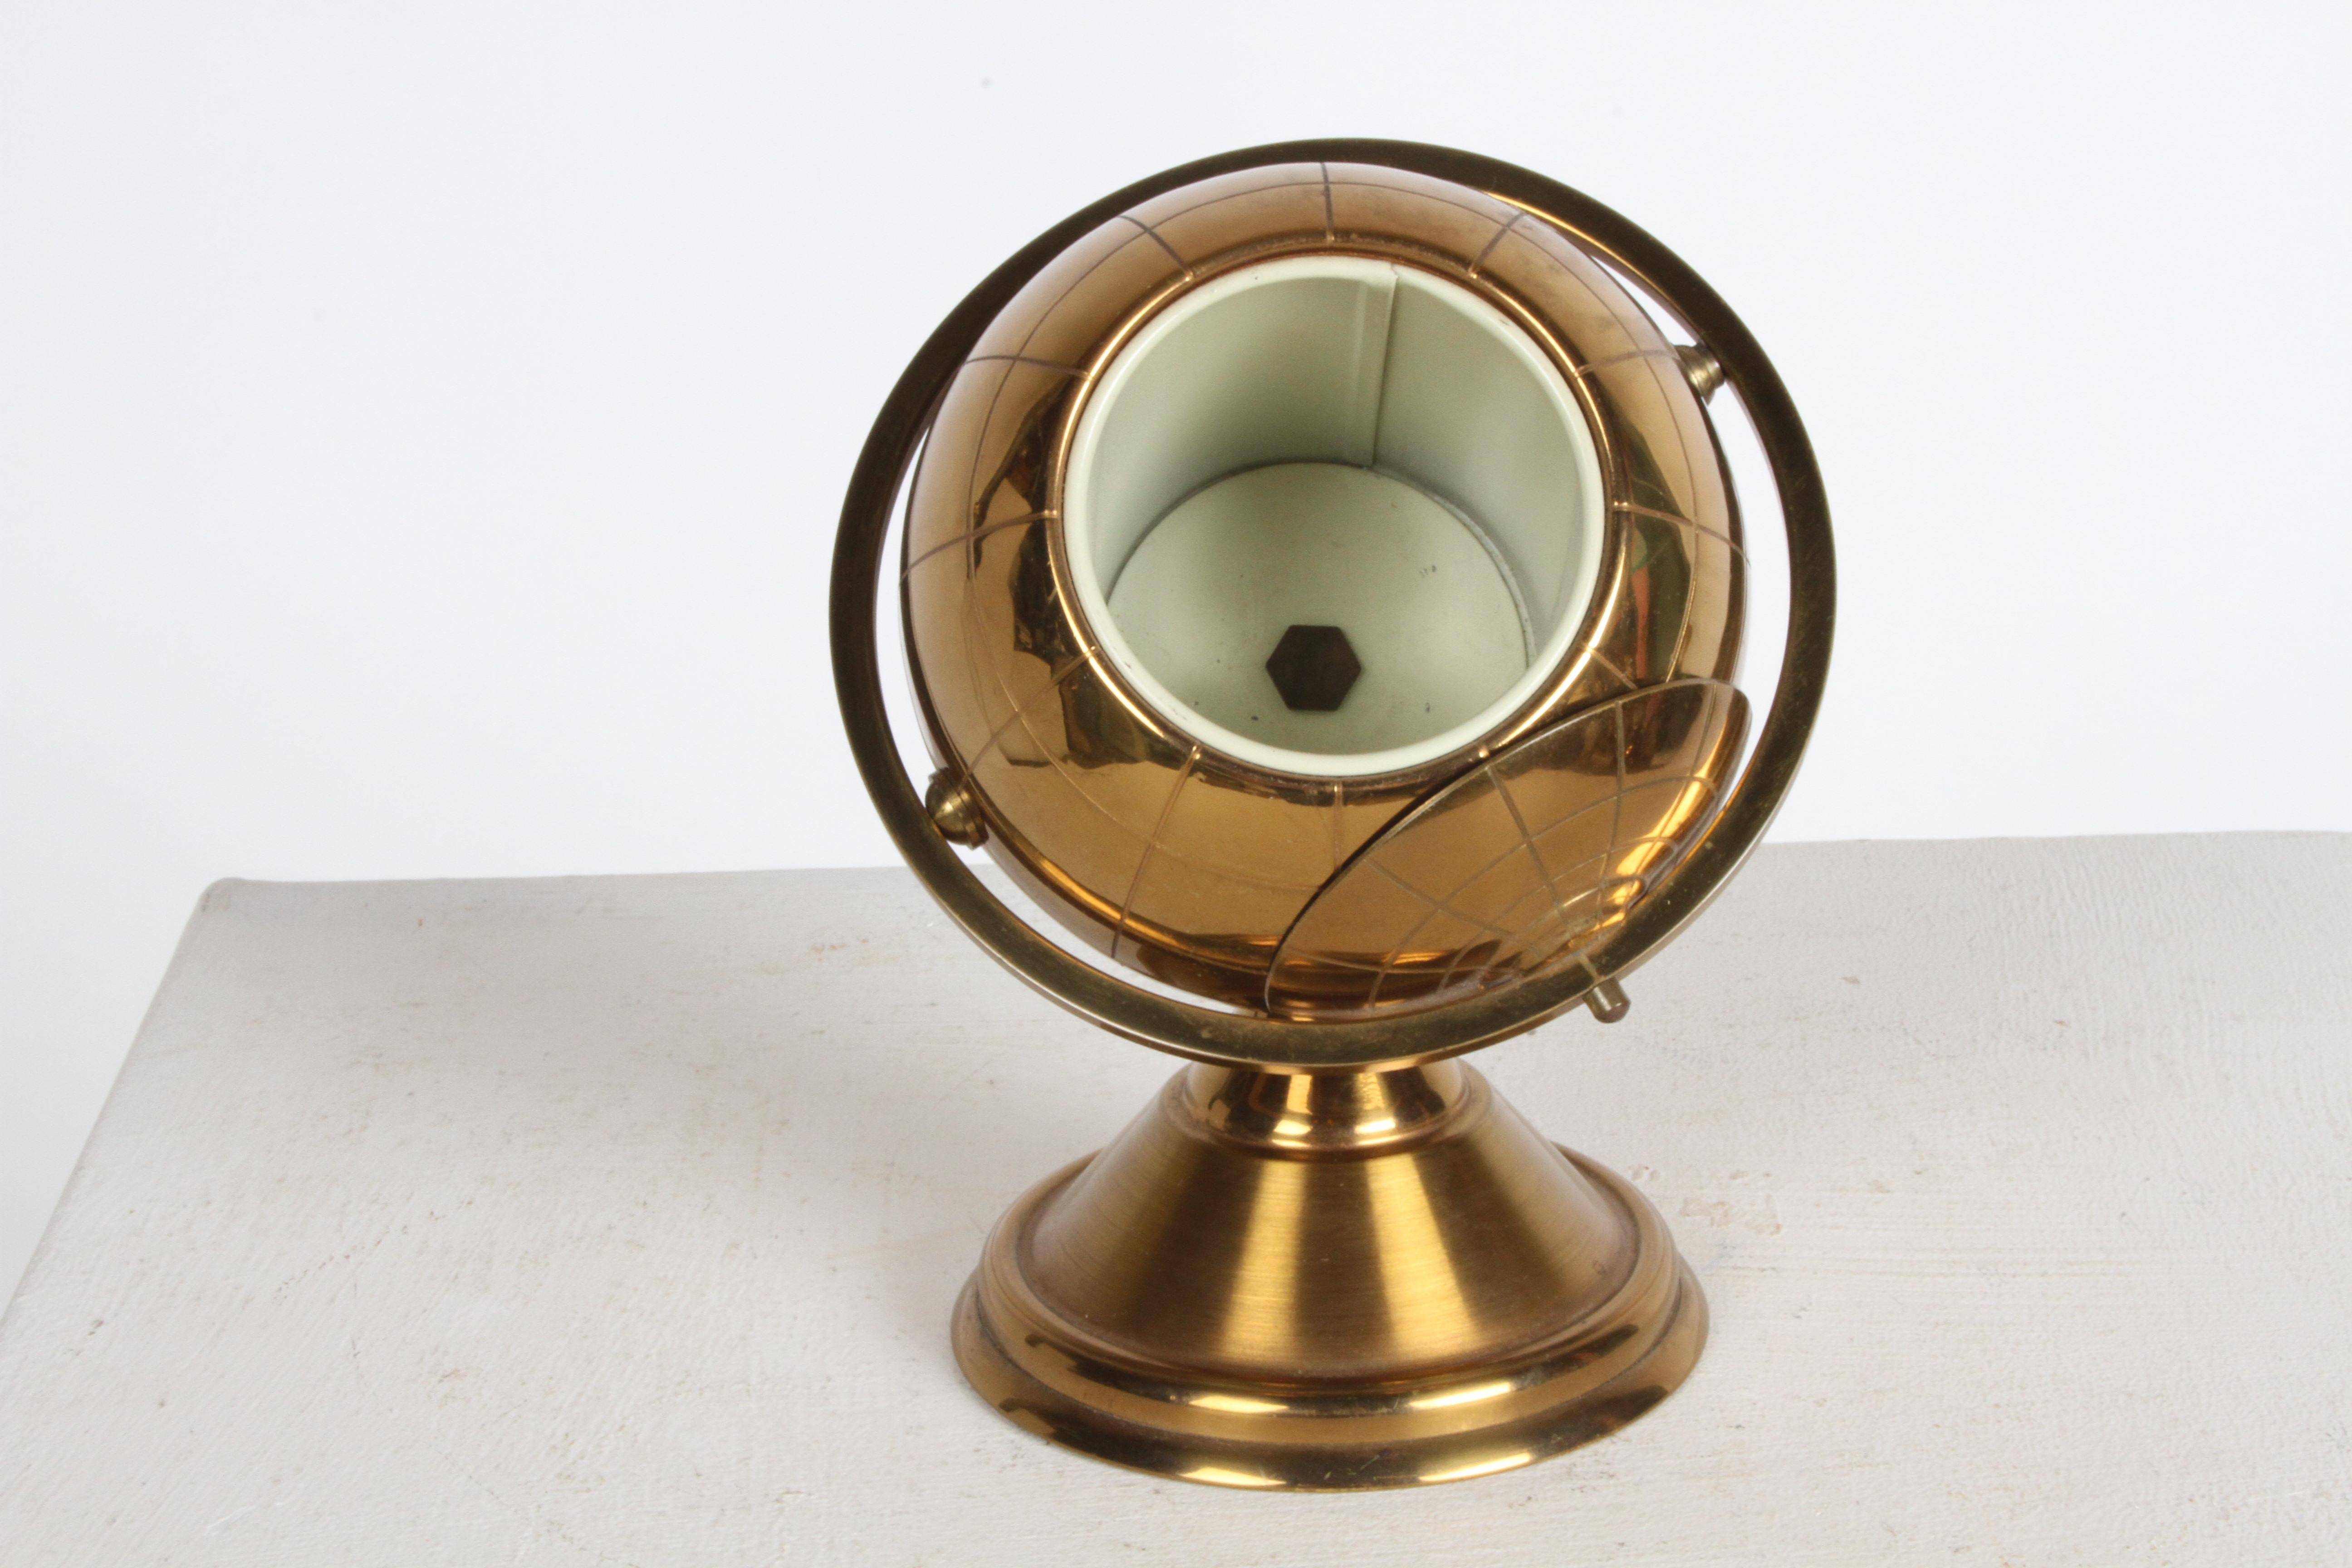 Circa 1960s Mid-Century Modern Brass Sputnik Globe - Opens to Cigarette Holder  In Good Condition For Sale In St. Louis, MO